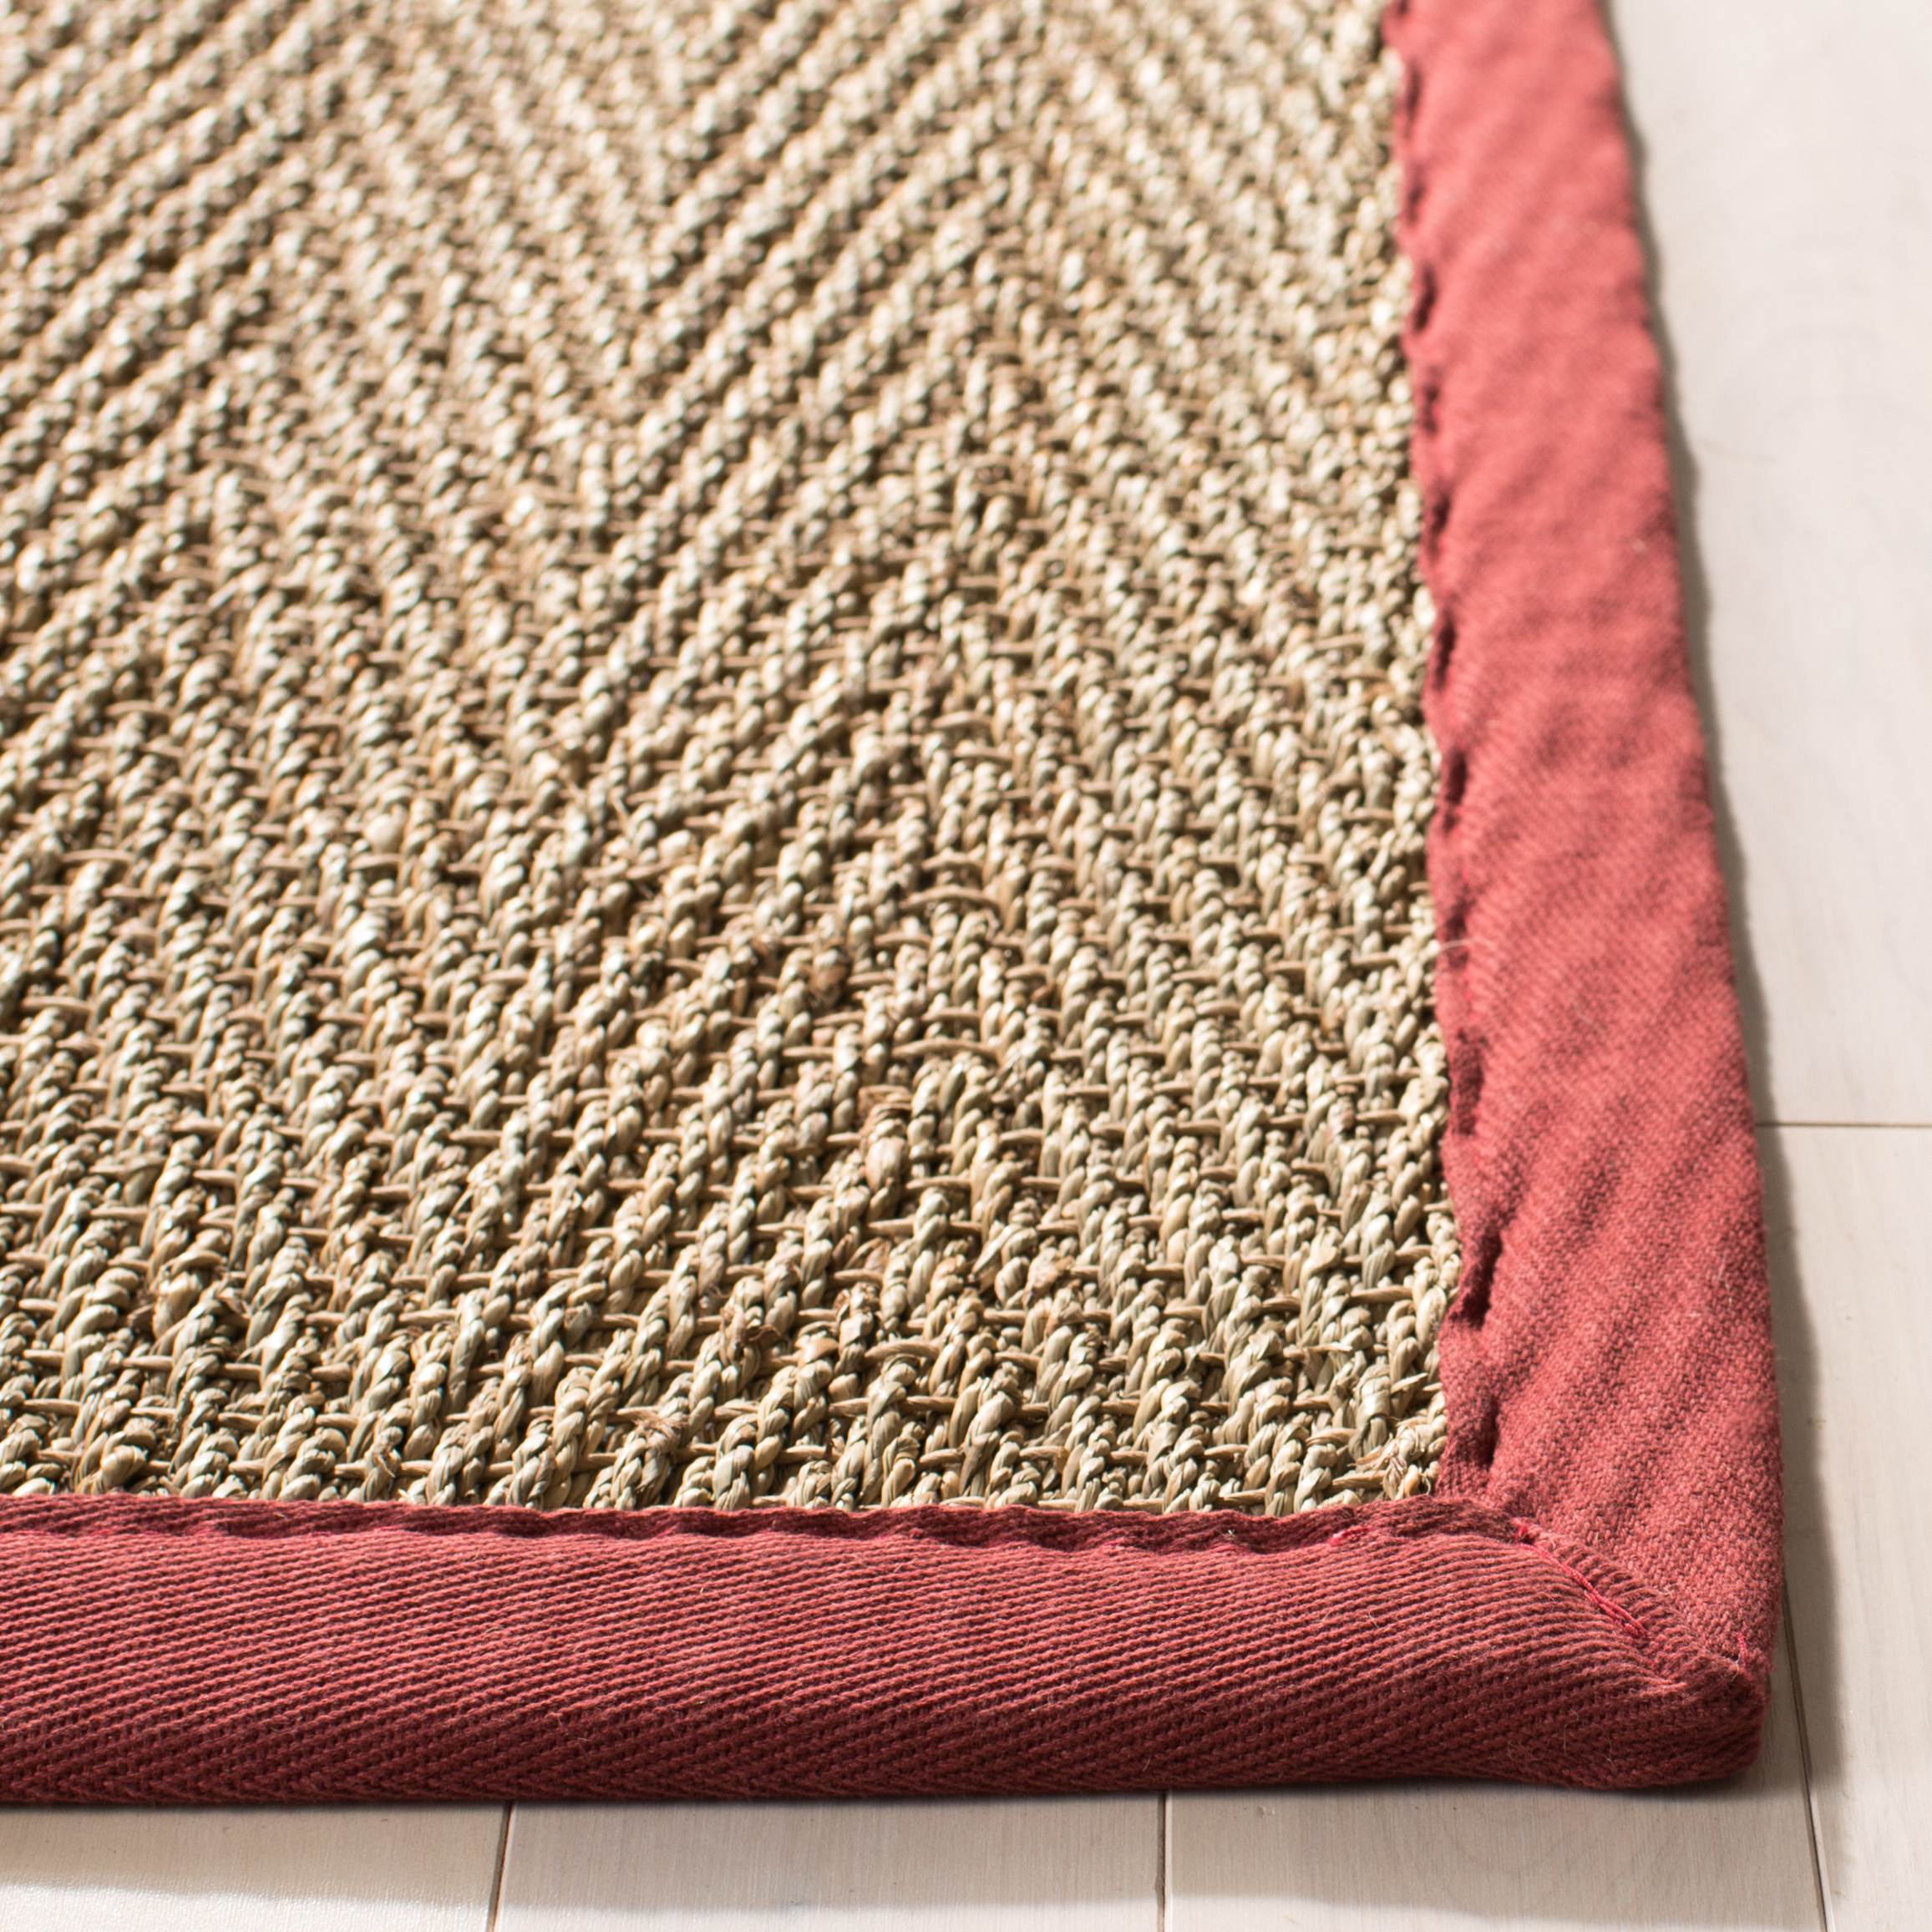 SAFAVIEH Natural Fiber Maisy Border Seagrass Area Rug, Natural/Red, 8' x 10' - image 5 of 8